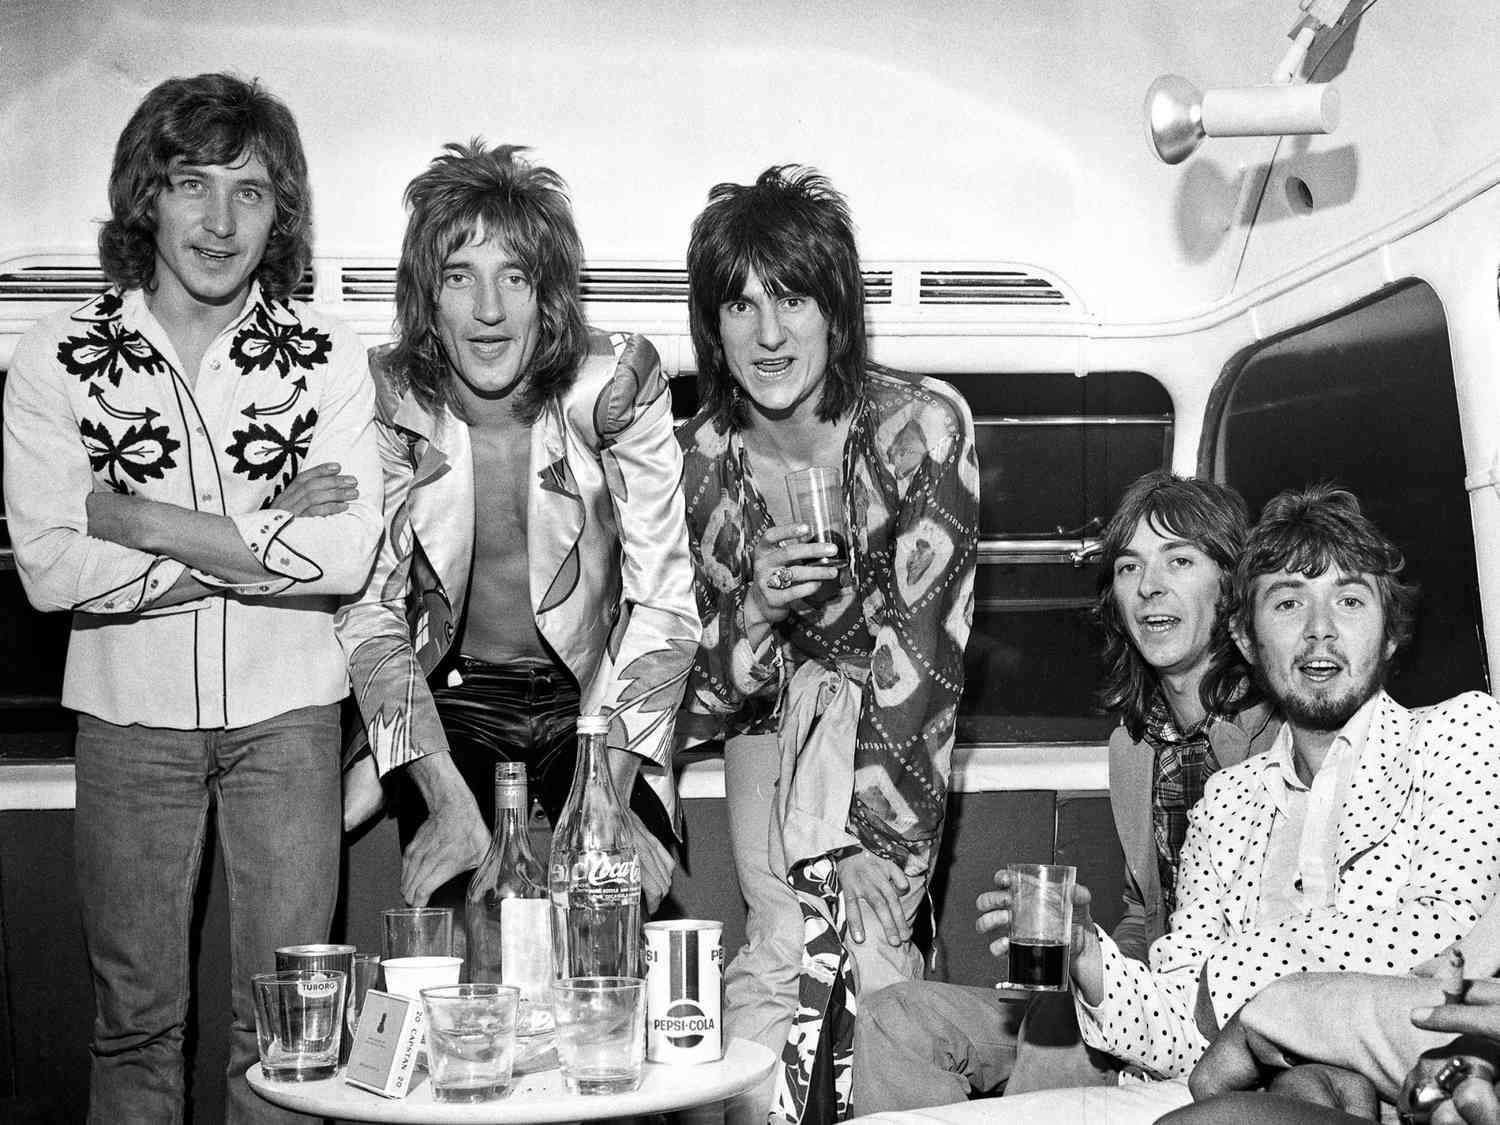 Rod Stewart With Kenney Jones, Ronnie Wood, Ian McLagan, and Ronnie Lane on the Top Deck of Their Bus on September 1, 1971